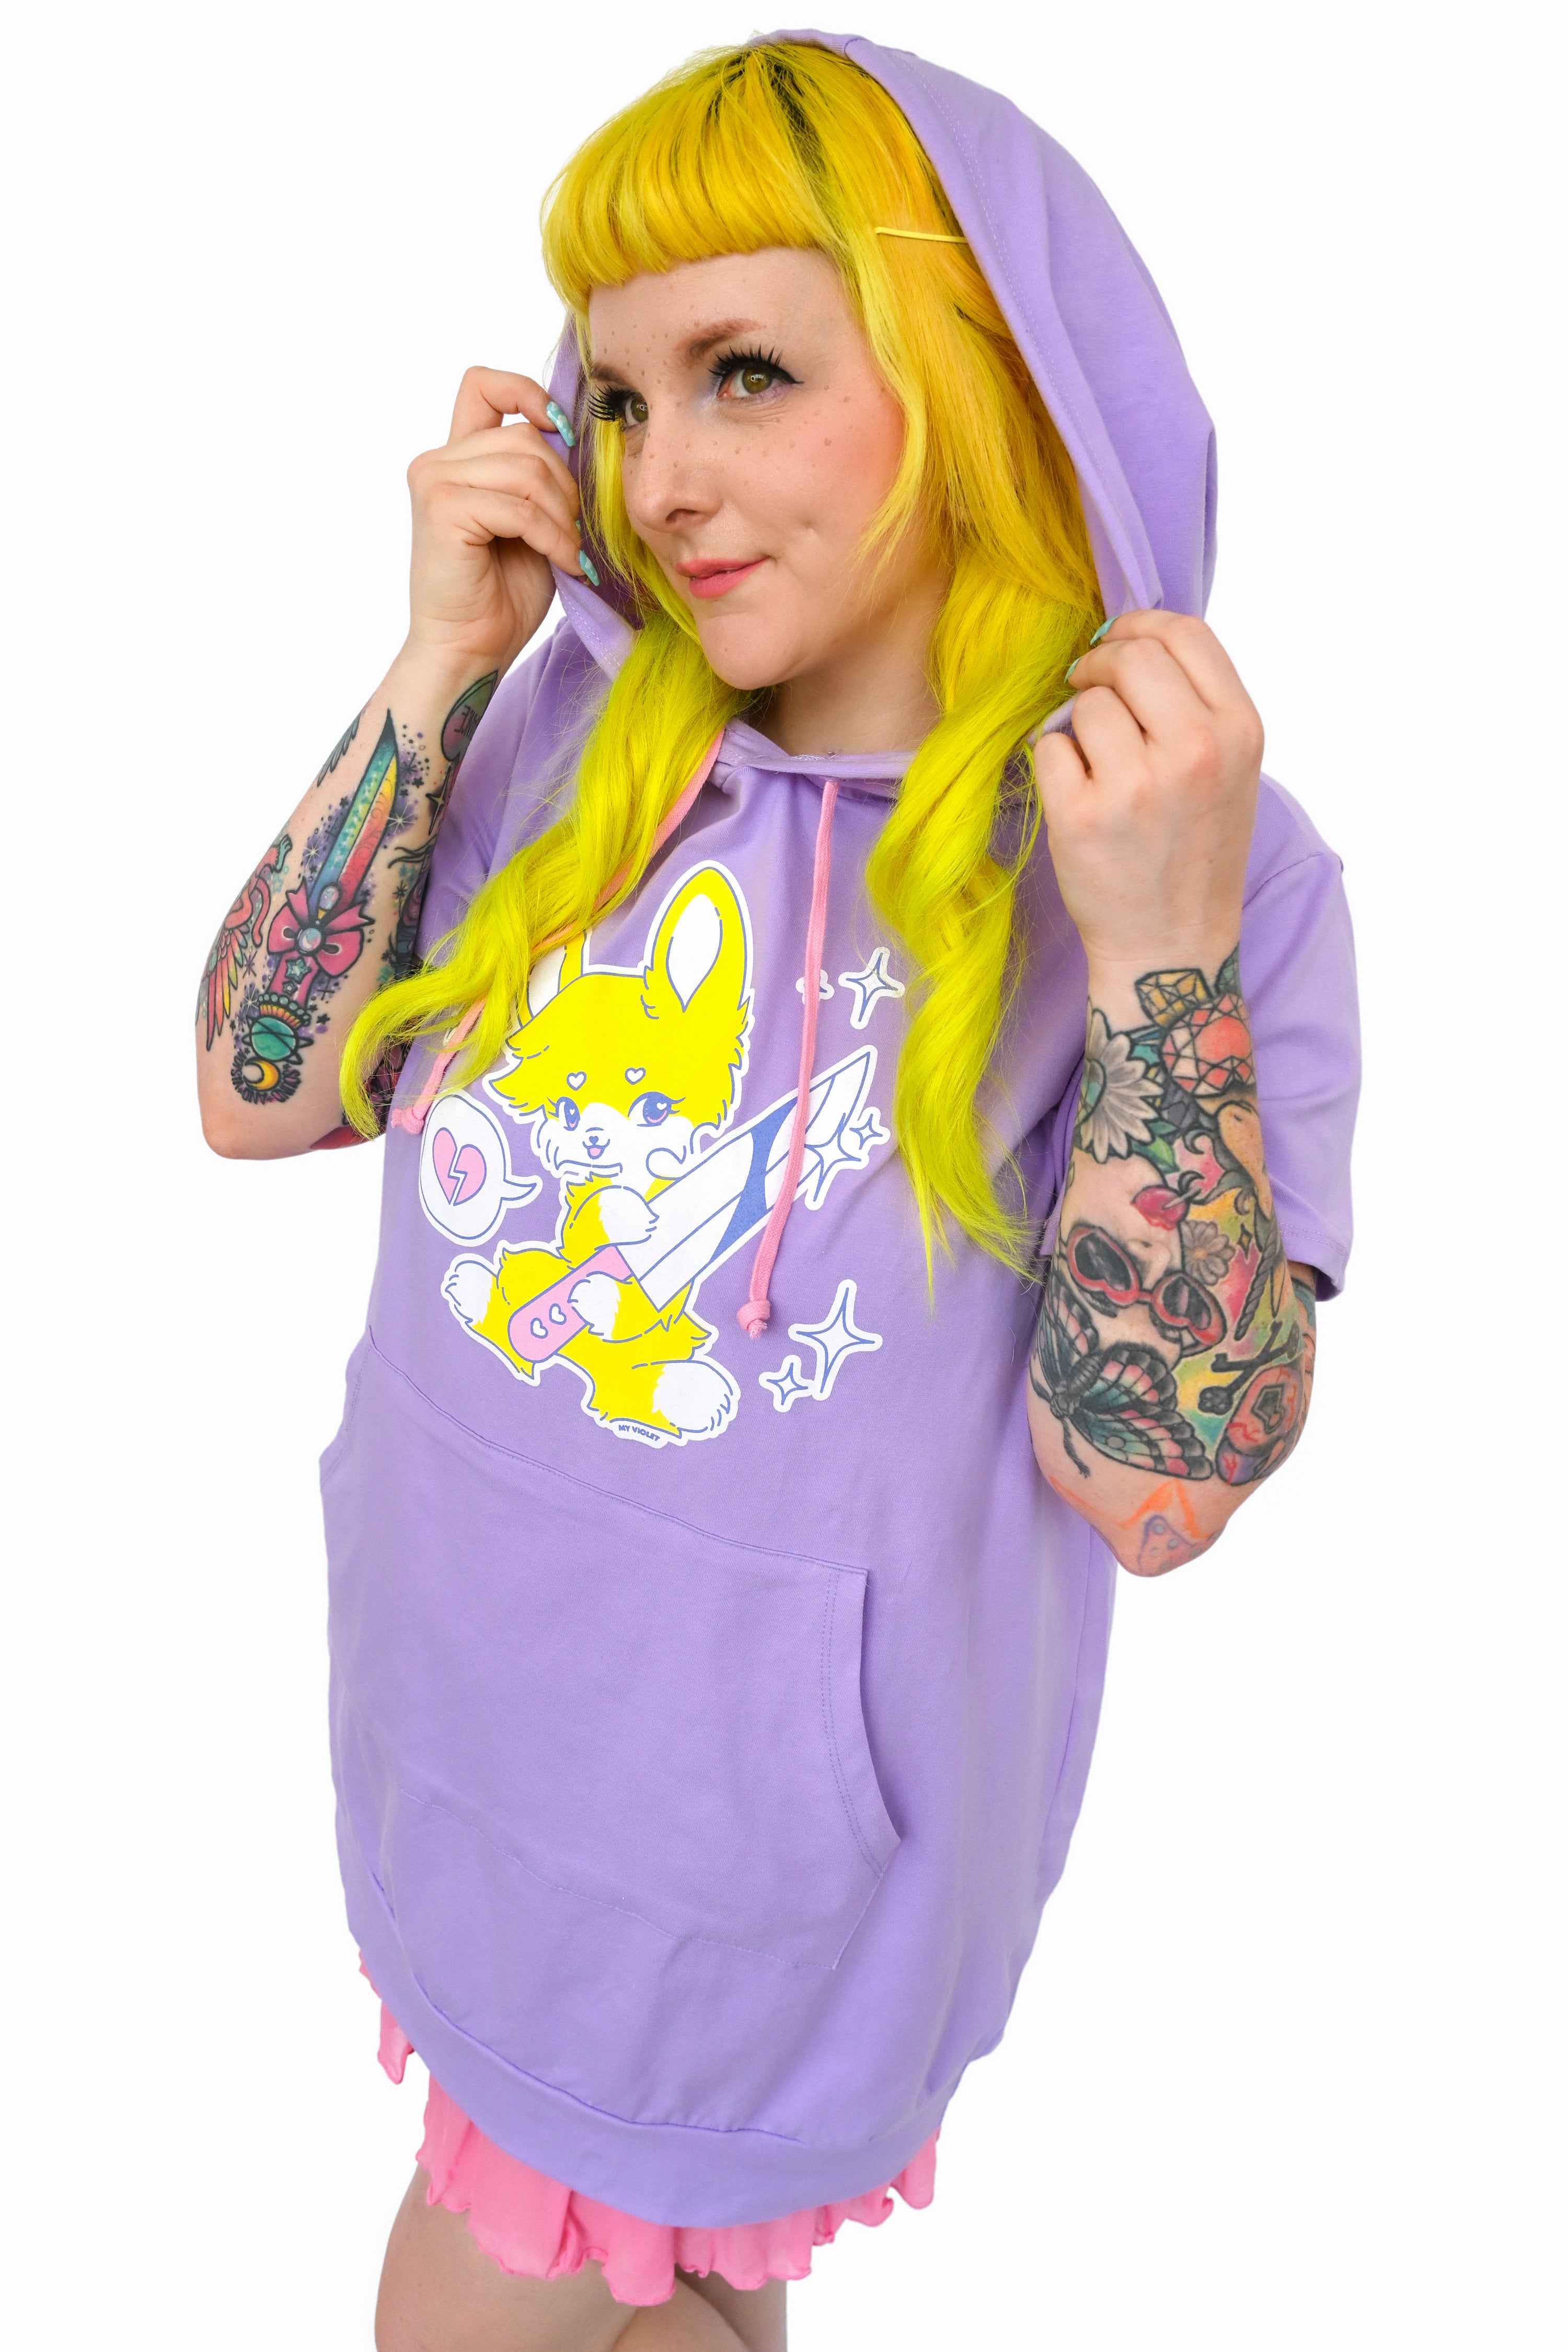 Lavender short sleeve hoodie featuring a yellow bunny holding a knife